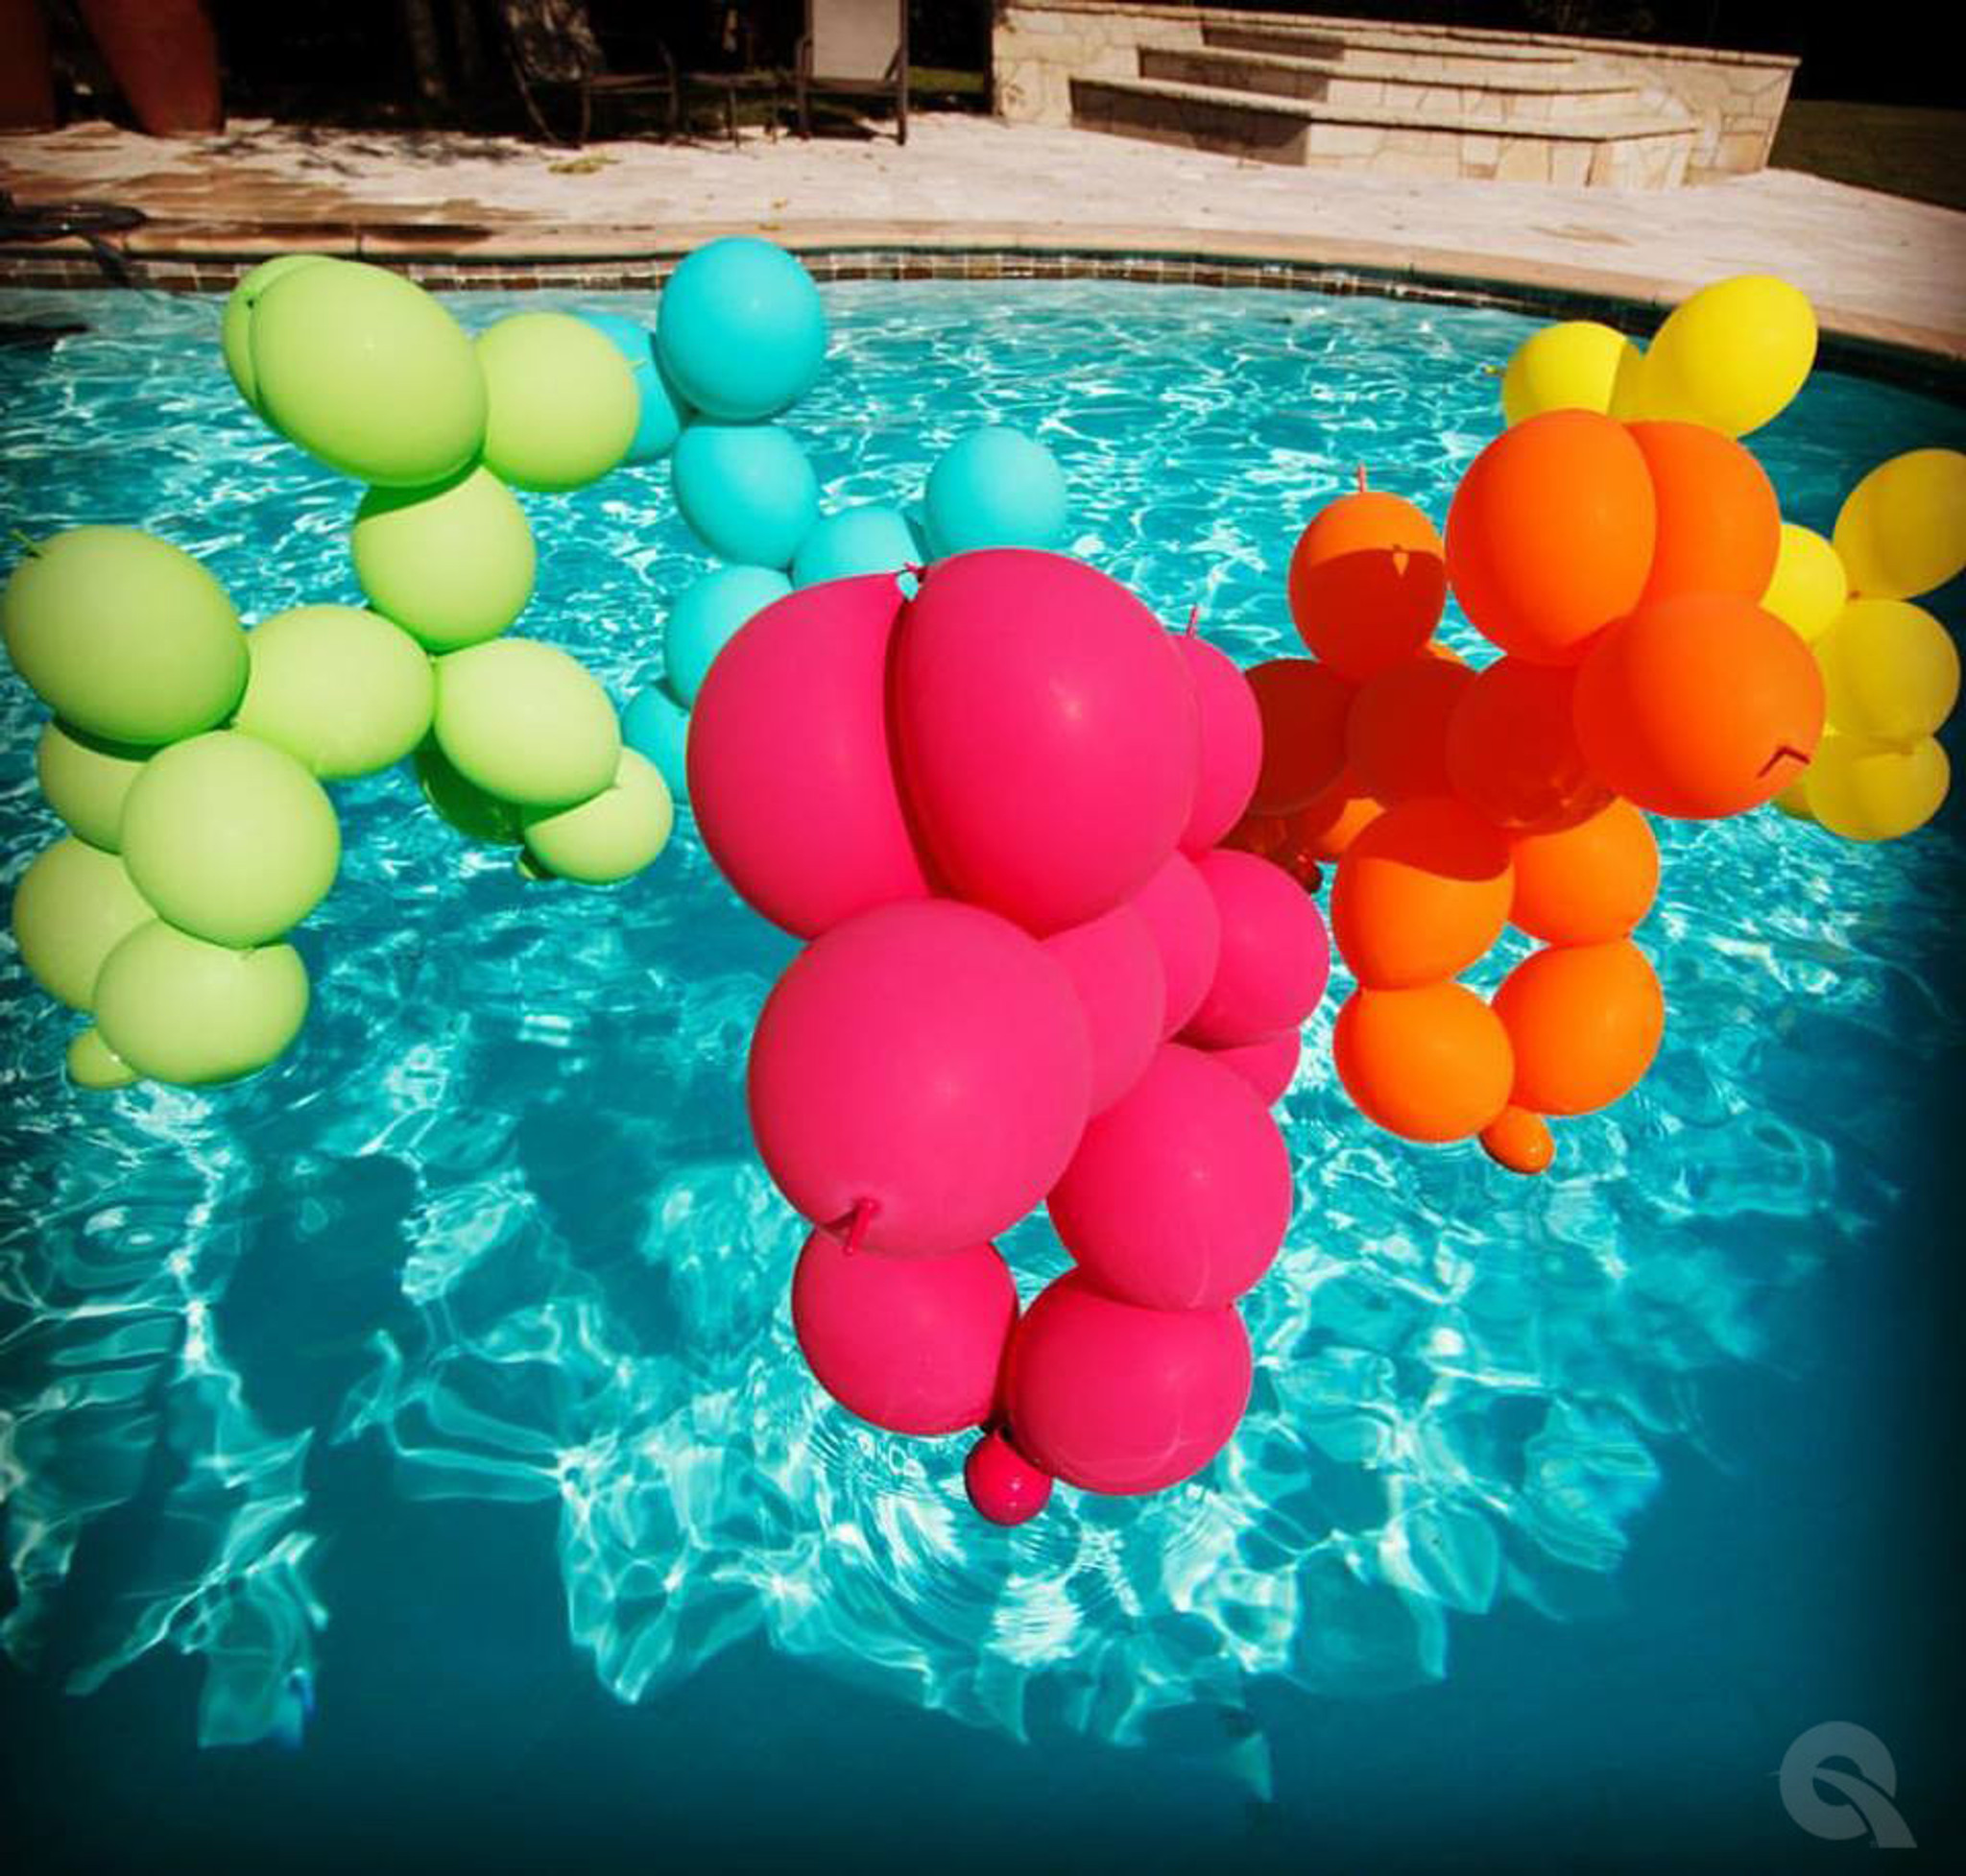 giant balloon animals floating in pool